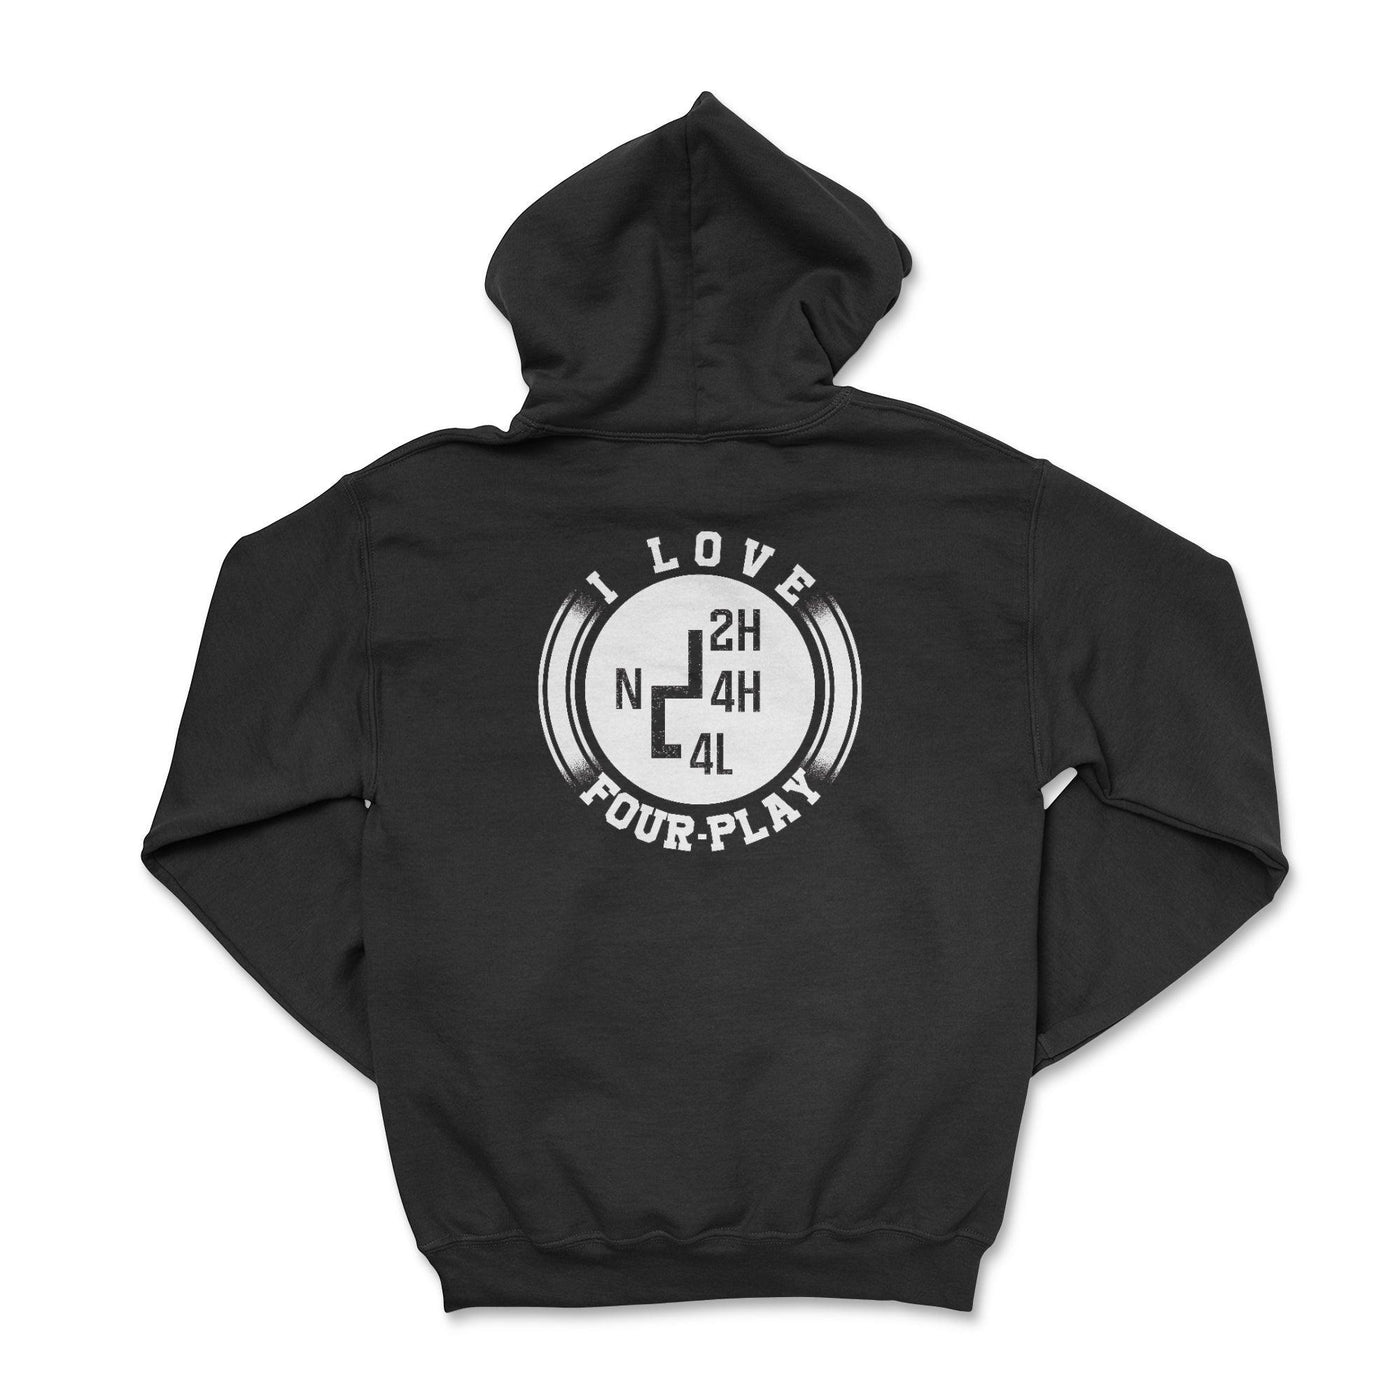 Funny I Love Four Play Black Zip-Up Hoodie - Goats Trail